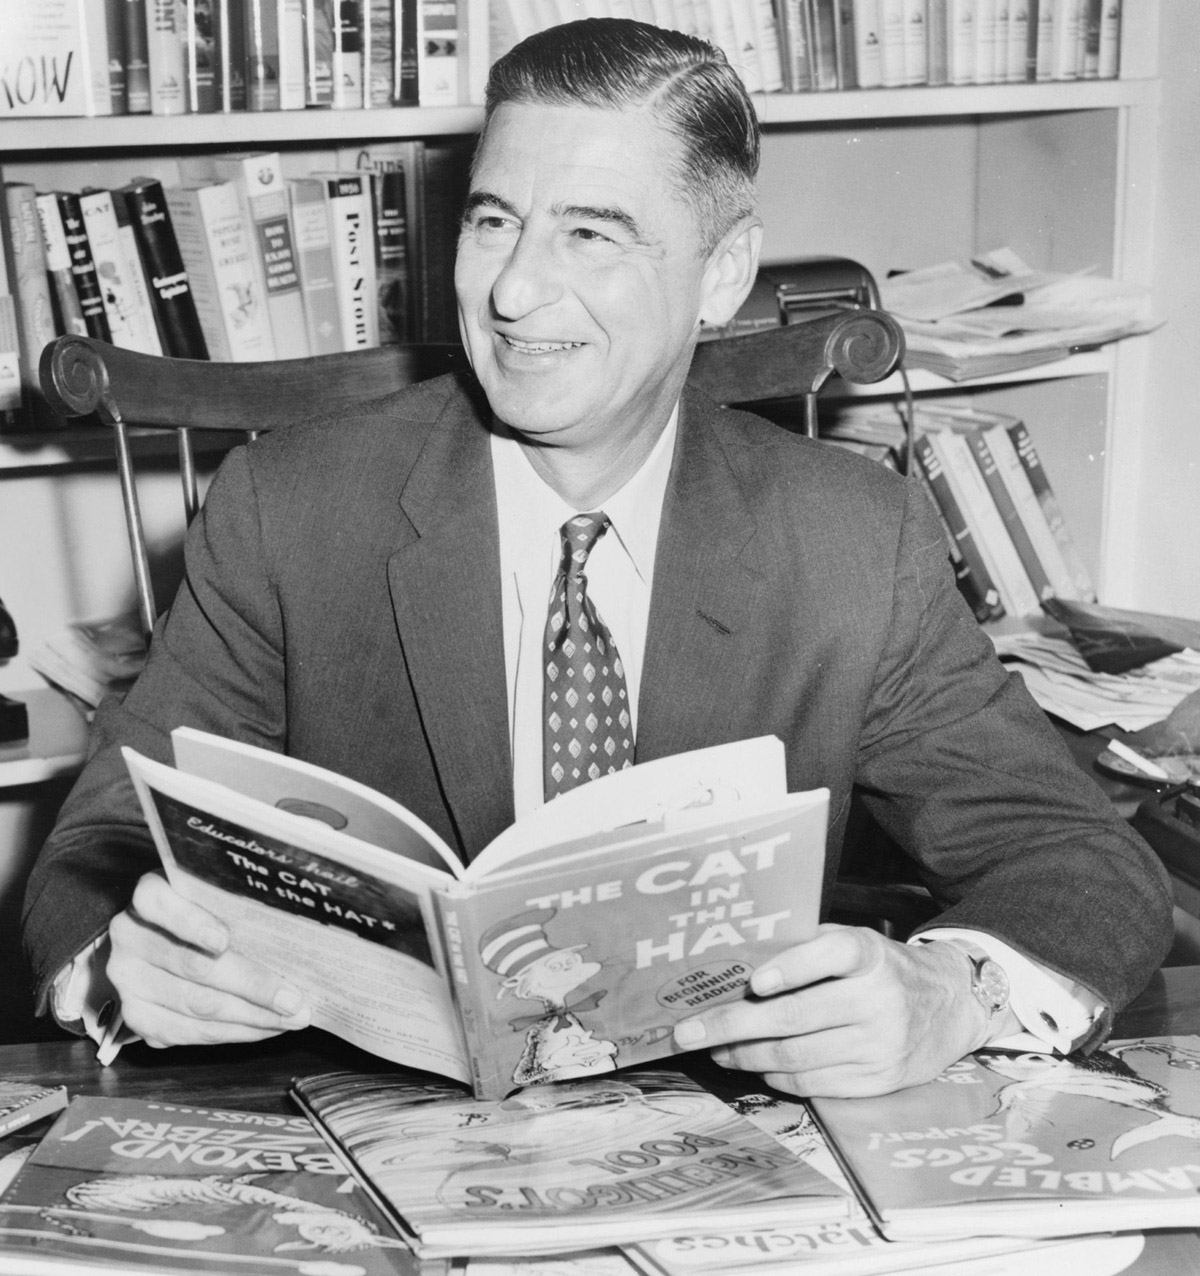 Dr. Seuss poses with The Cat in the Hat and other books, c. 1957